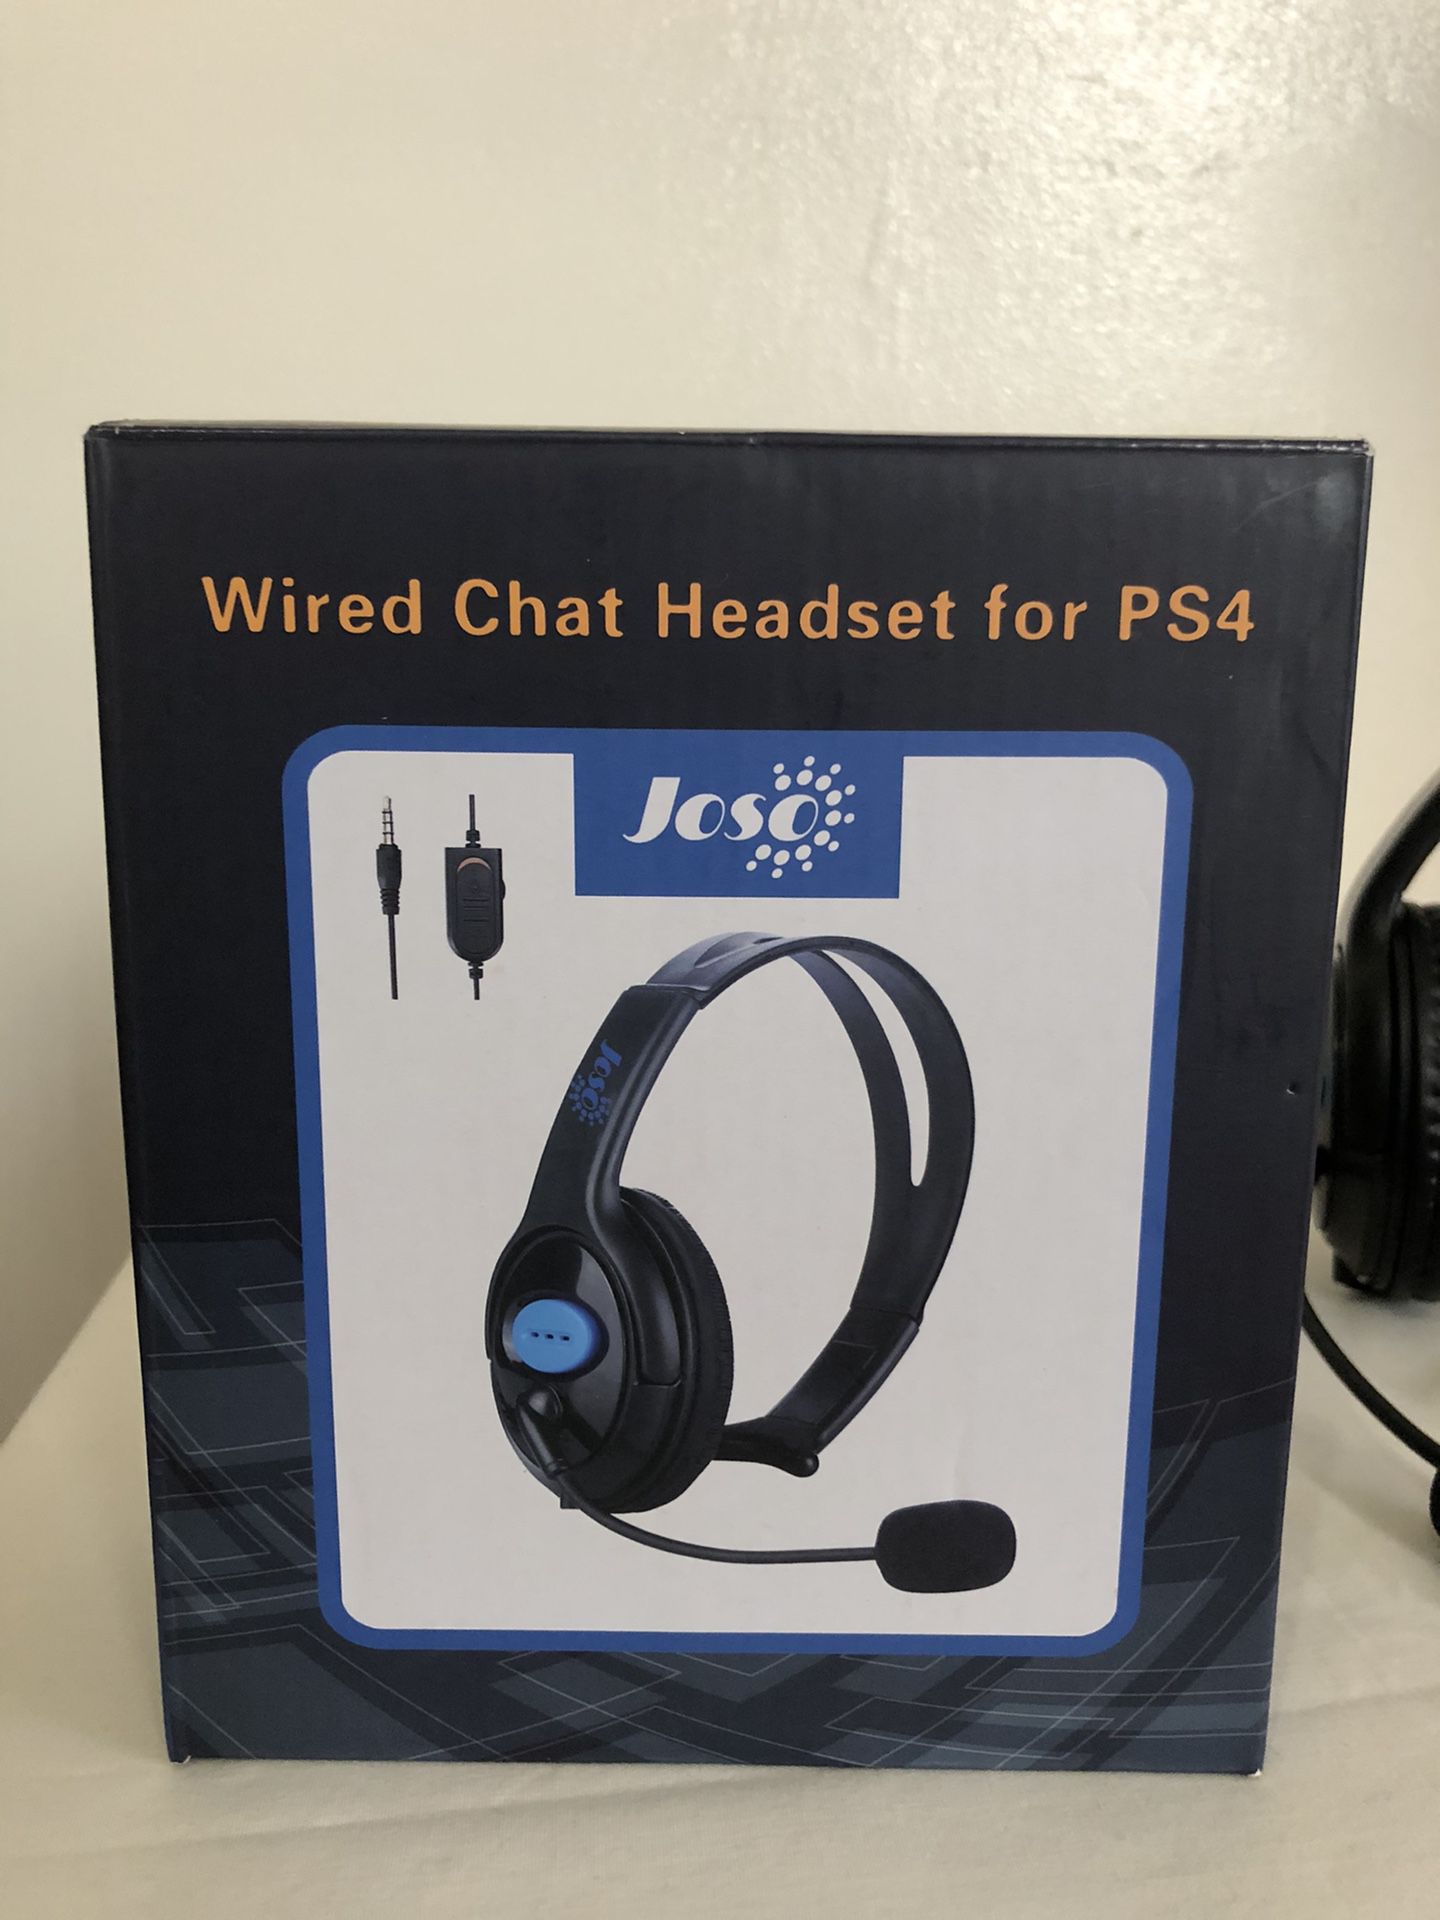 Wired Chat Headset for PS4